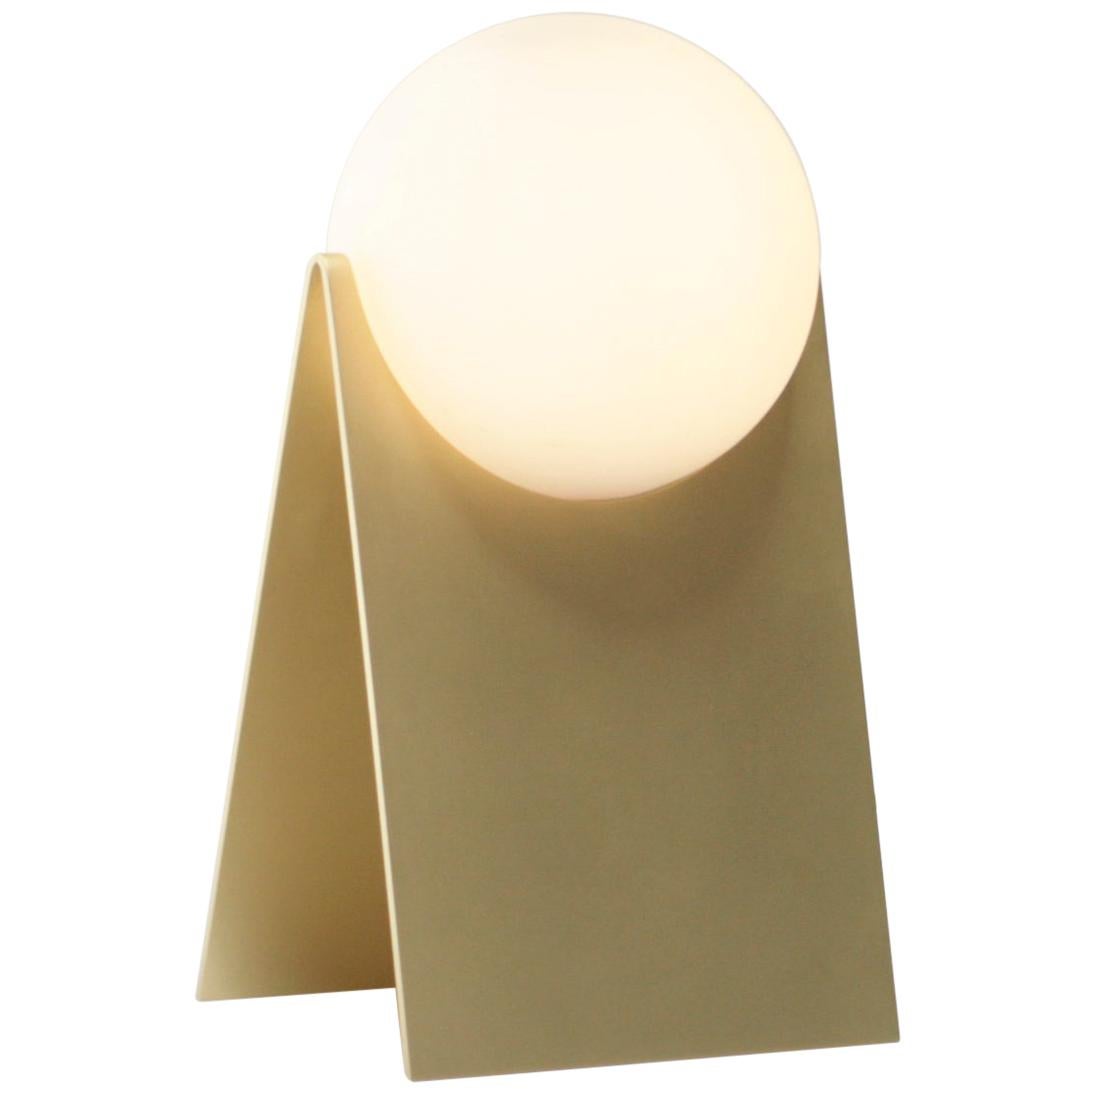 LUNA Table Lamp in Brass and Hand Blown Glass by Estudio Persona